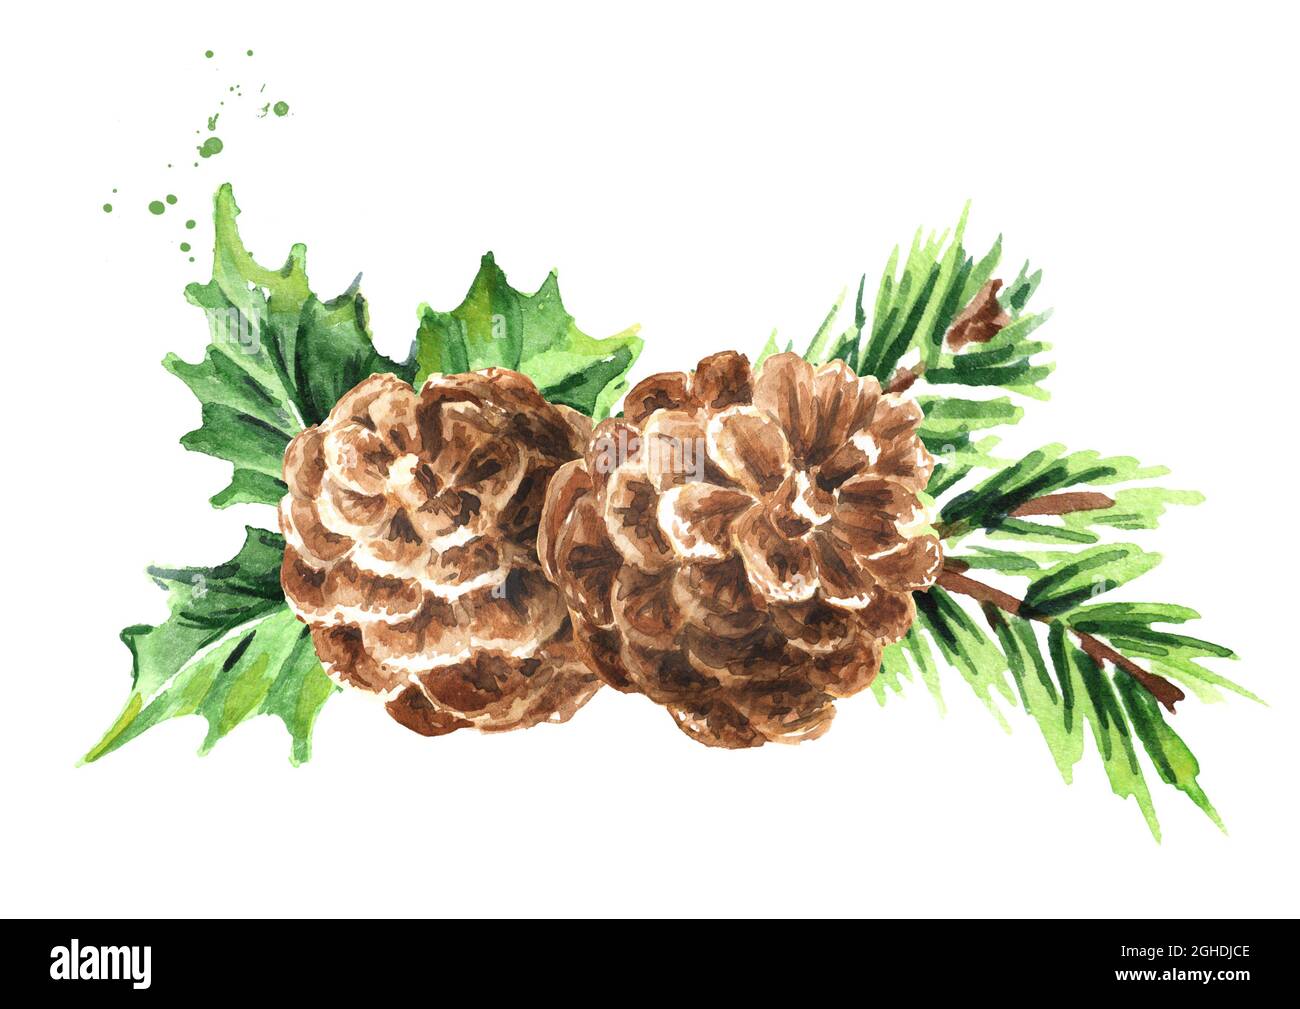 Winter Greenery Clip Art, Pine Clipart, Christmas Greens, Leaves, Berries,  Holly, Pine Cones, Pines, Watercolor Clipart DIY Christmas Cards 